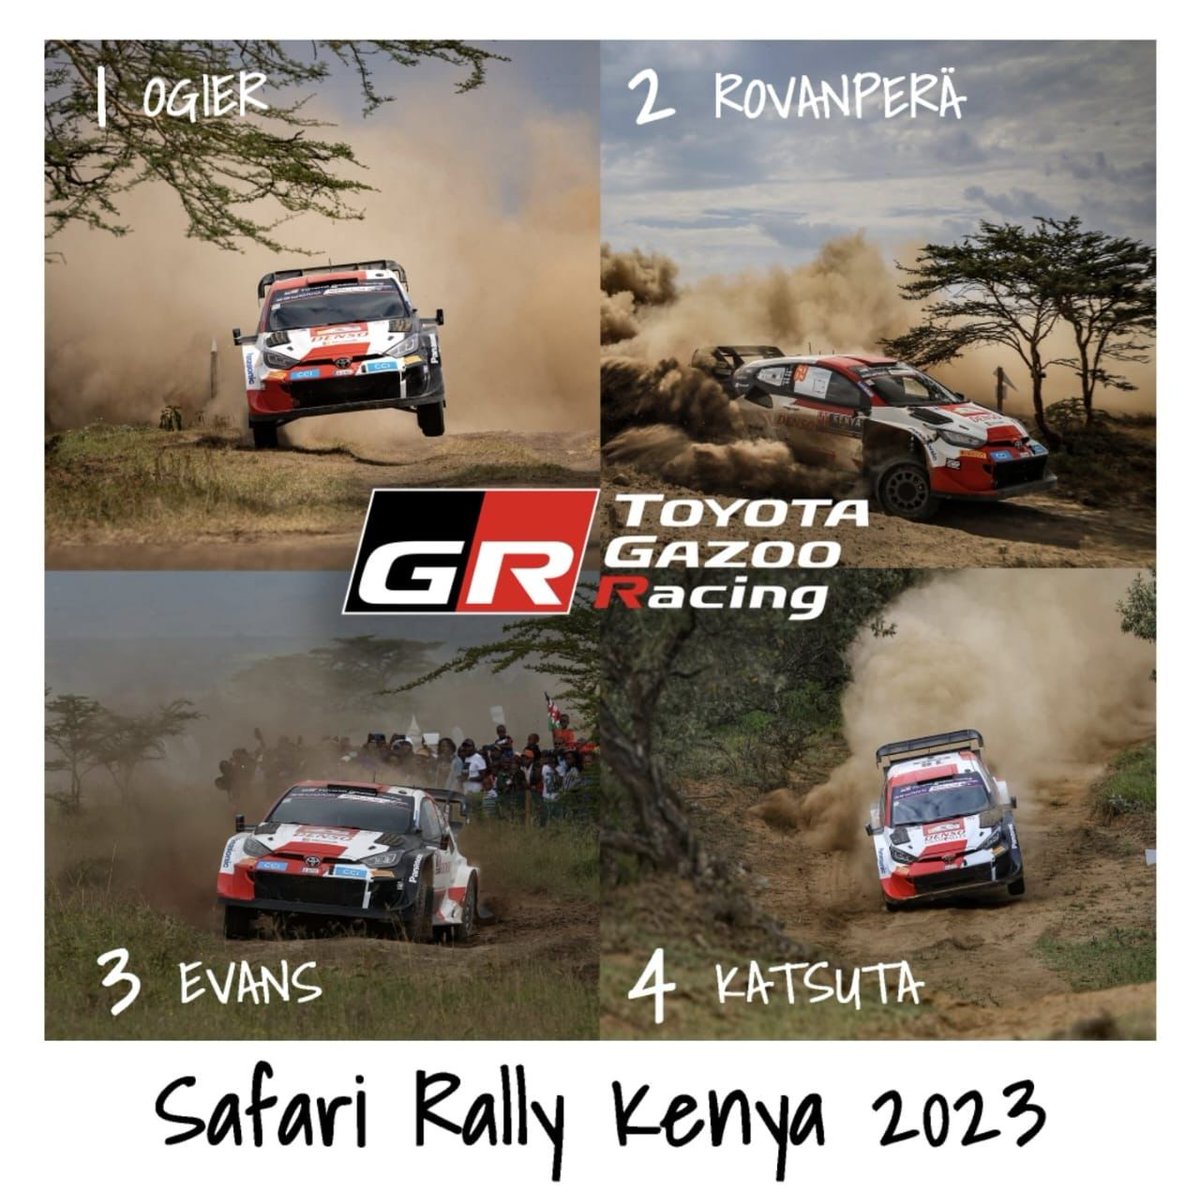 The 1-2-3-4 finish comes 30 years to the month since Toyota first recorded such a result in Kenya with the Celica ST185, something it repeated with the GR YARIS Rally1 HYBRID in 2022
#ToyotaConquersSafariRally